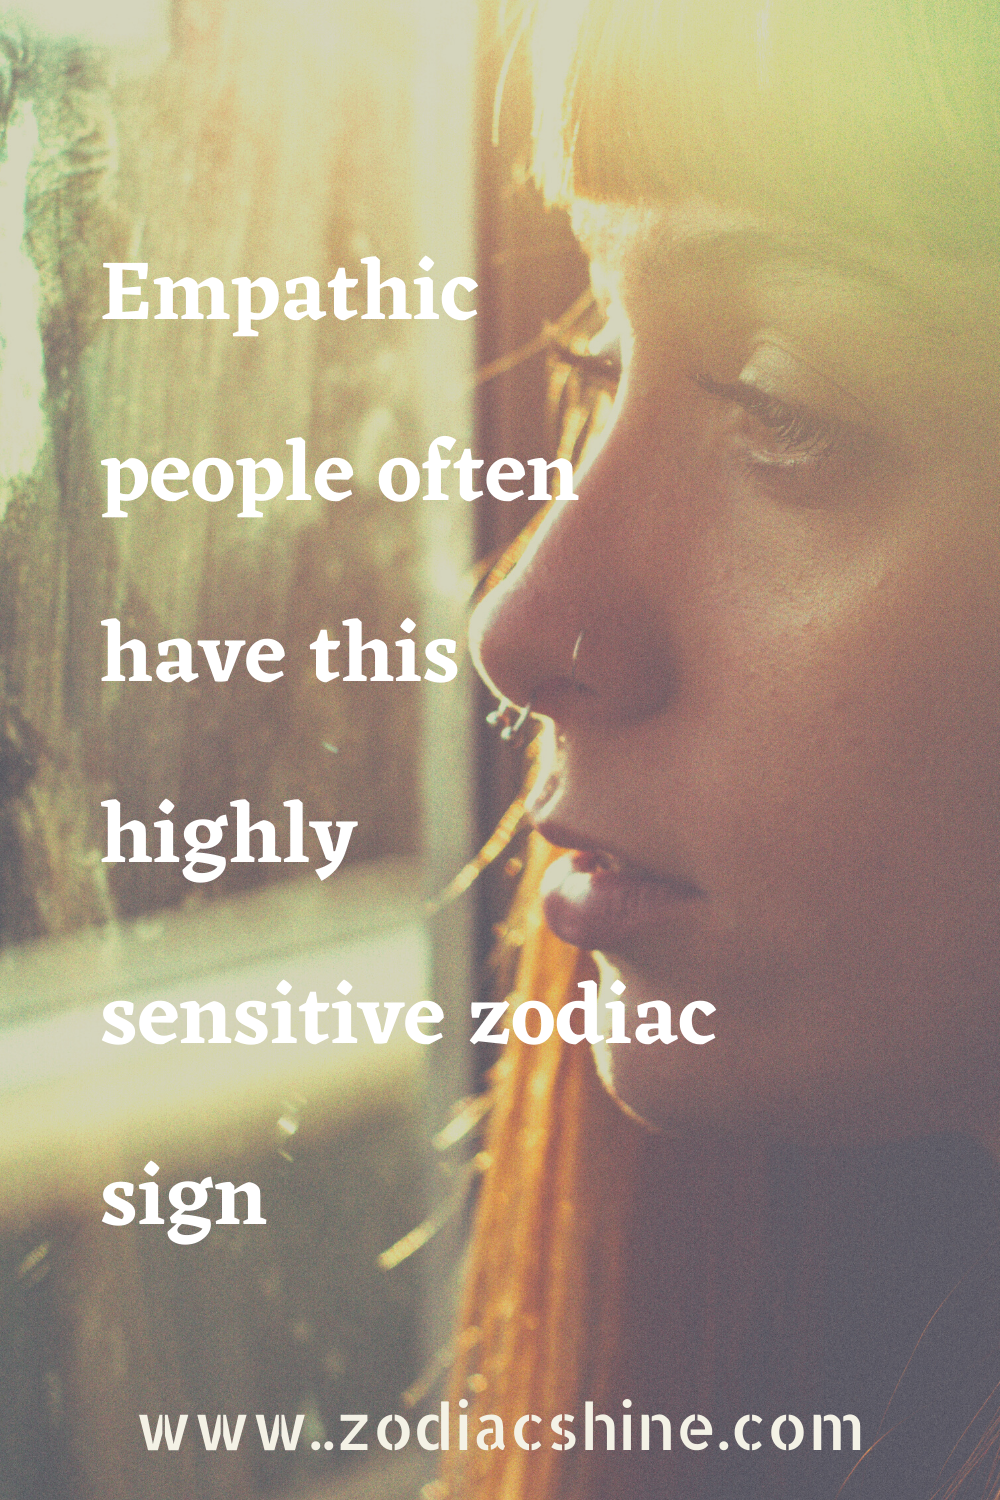 Empathic people often have this highly sensitive zodiac sign